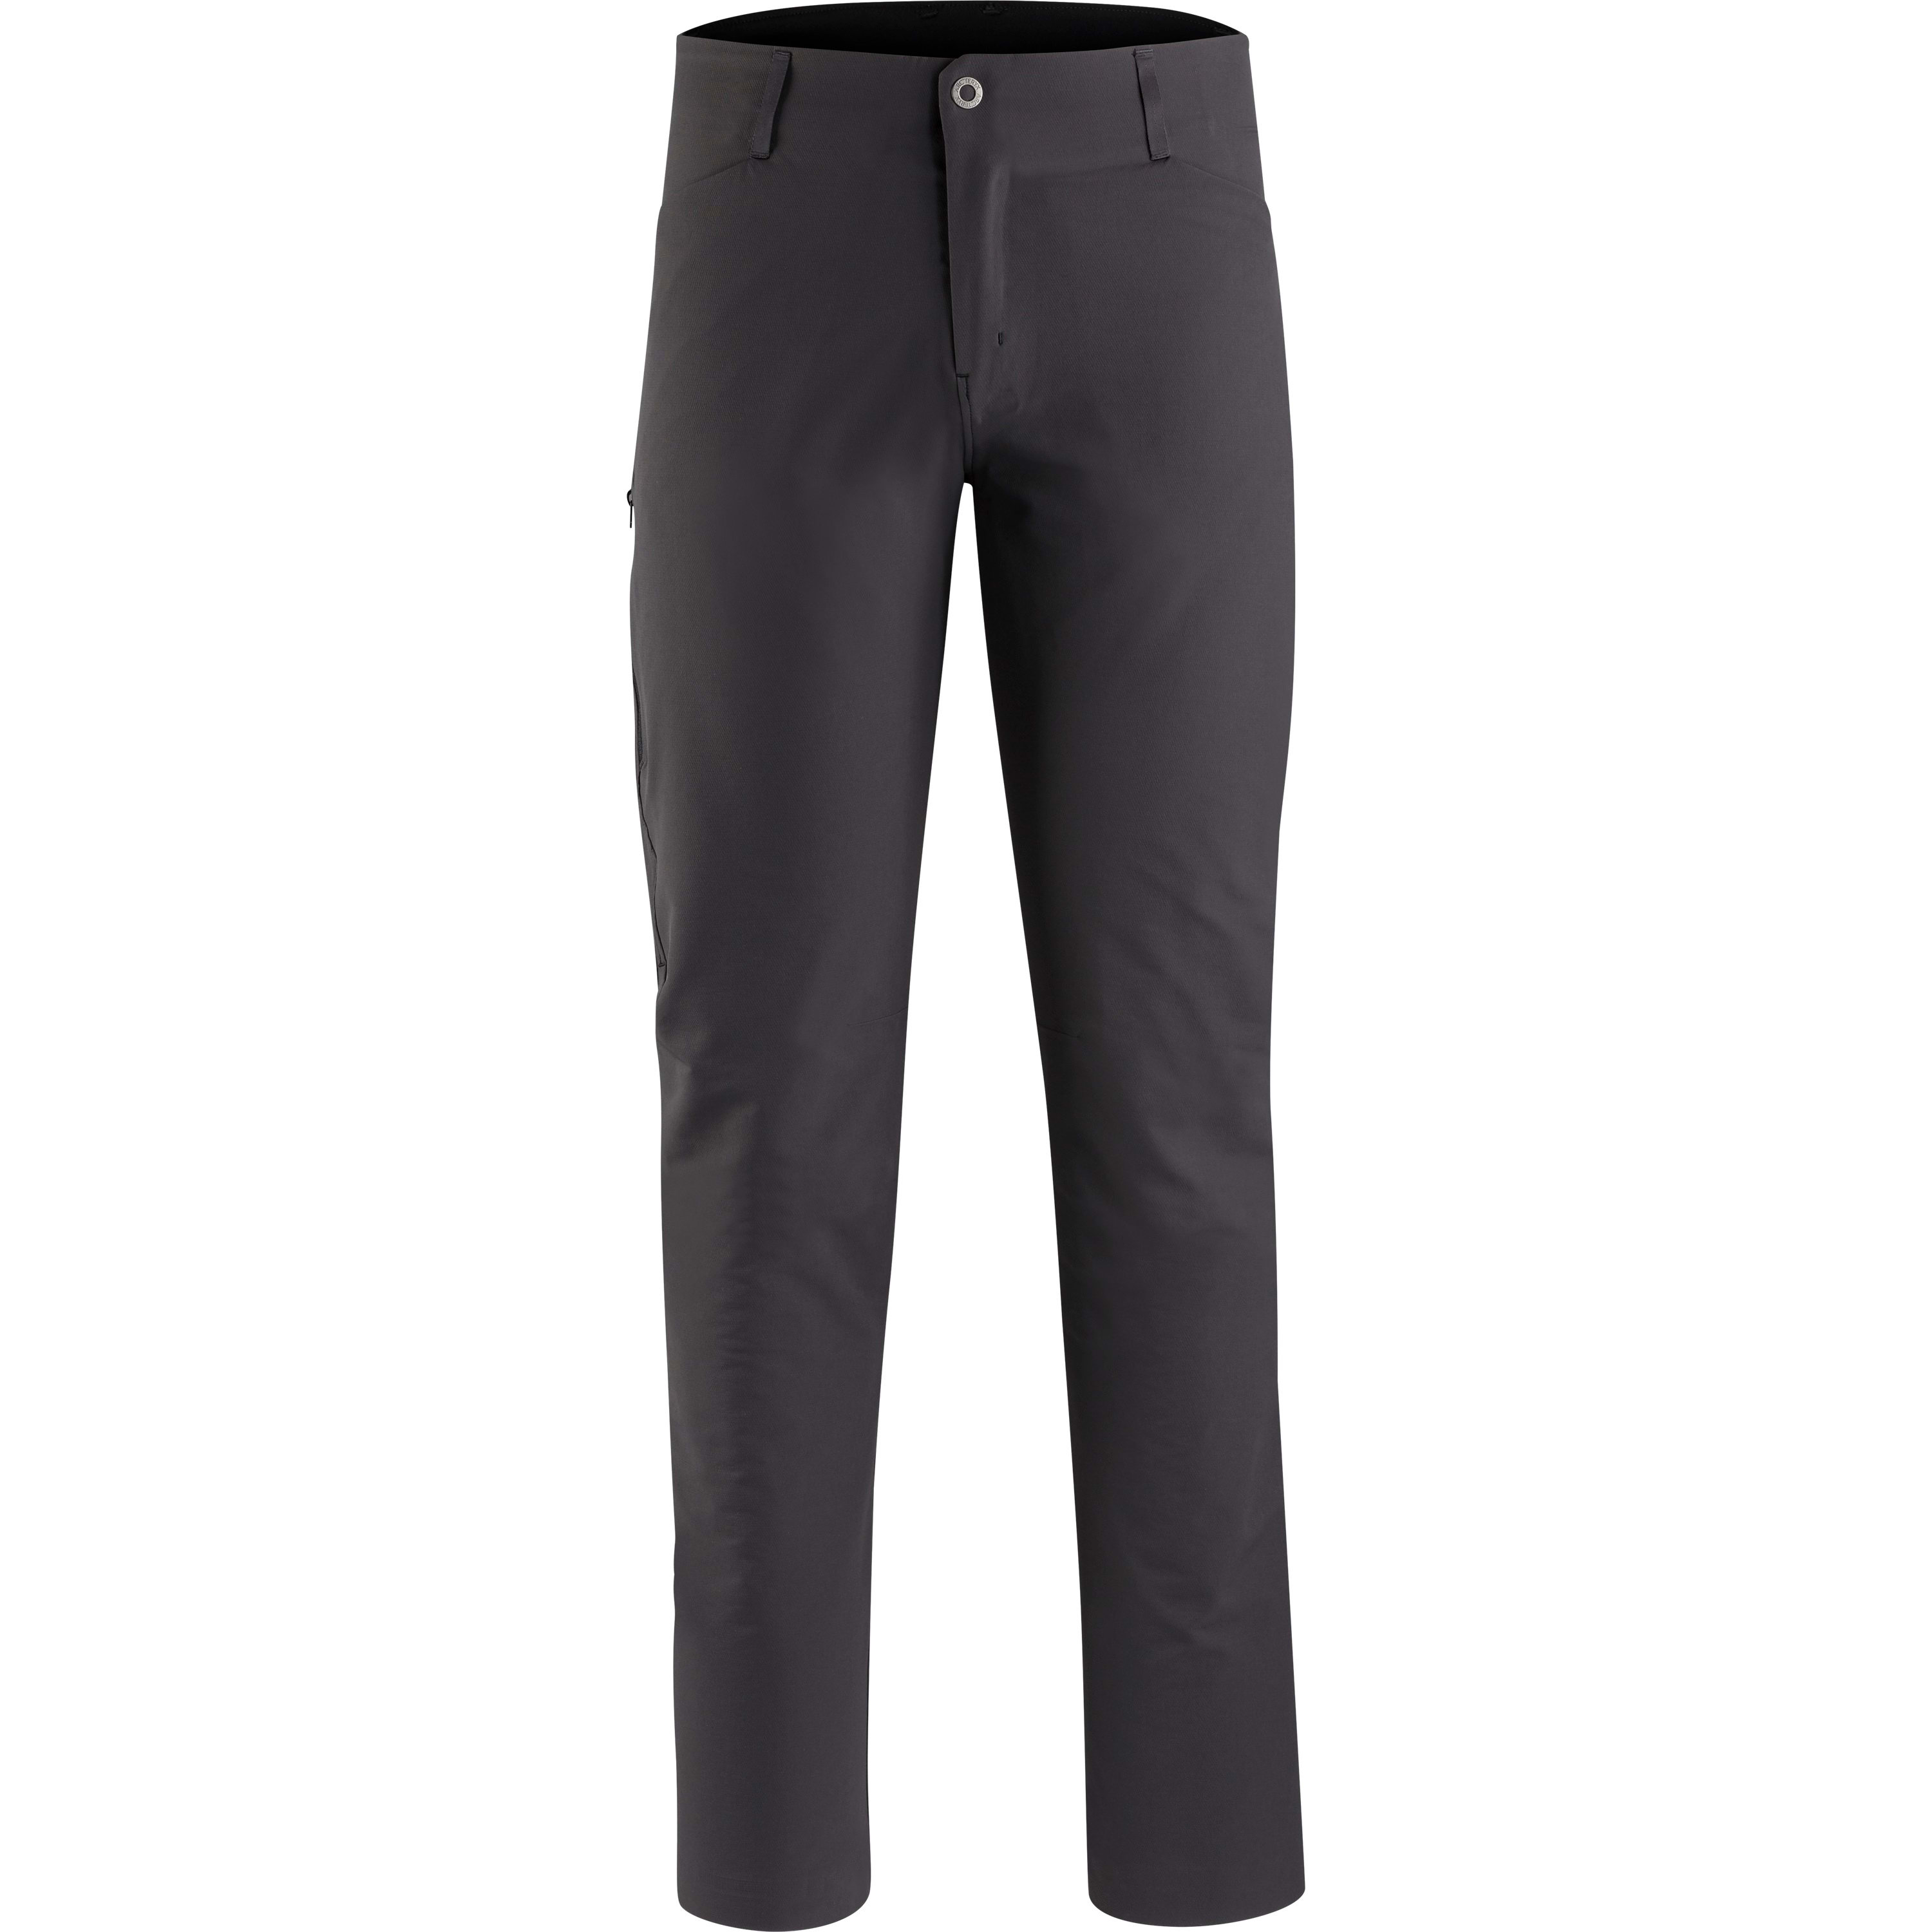 Buy Arc'teryx Creston AR Pant Men's from Outnorth